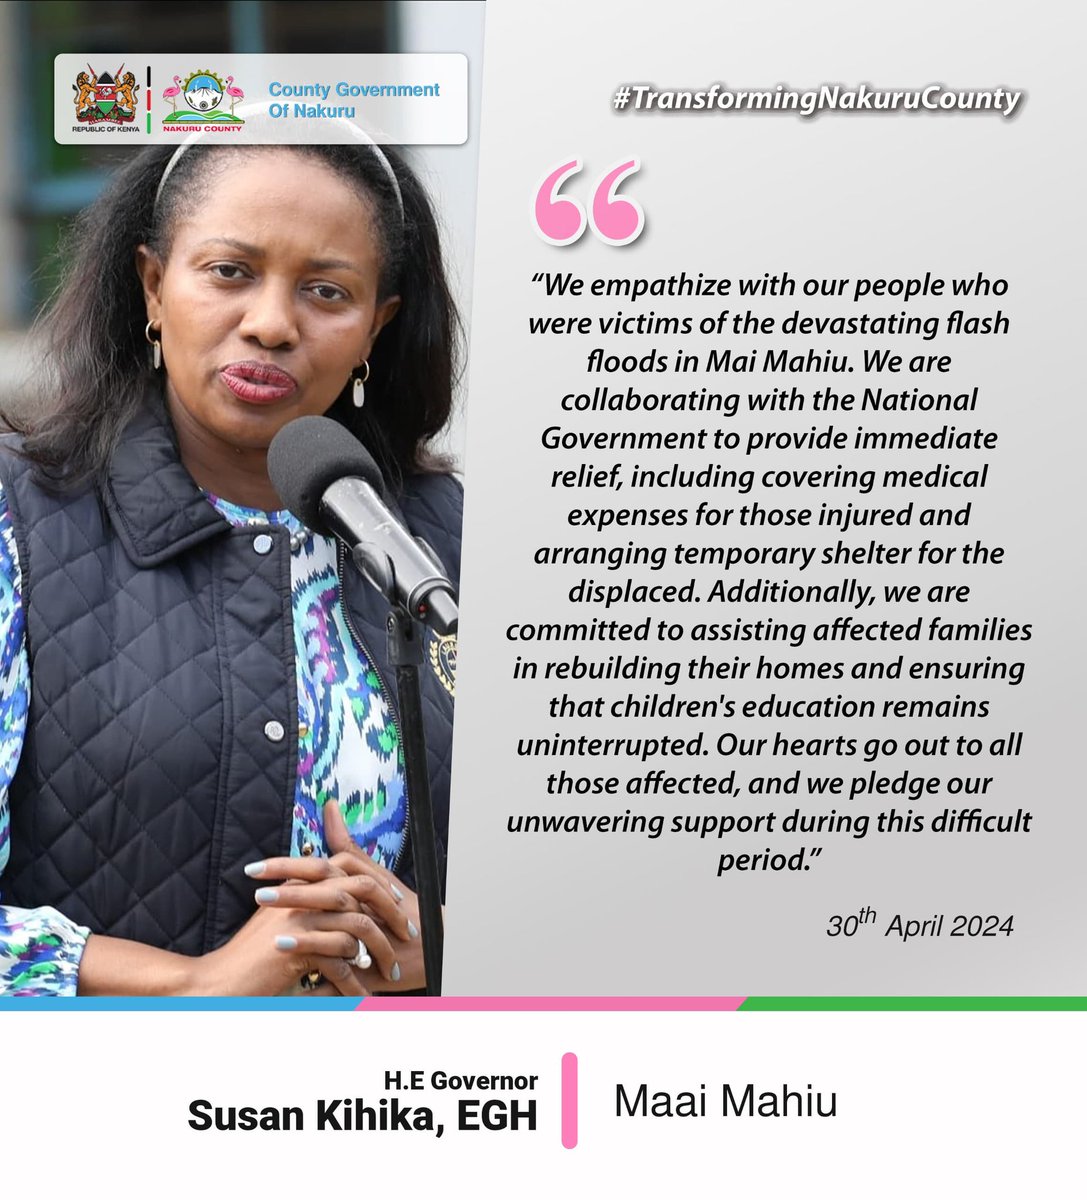 Leave alone Thika Superhighway Gotha #MafurikoKE Maasai Mara and JKIA. Nakuru Governor H.E @susankihika together with National government led by President William Samoei Ruto vows to support victims in Mai Mahiu. Let's all pray for our country Kenya in thus World!